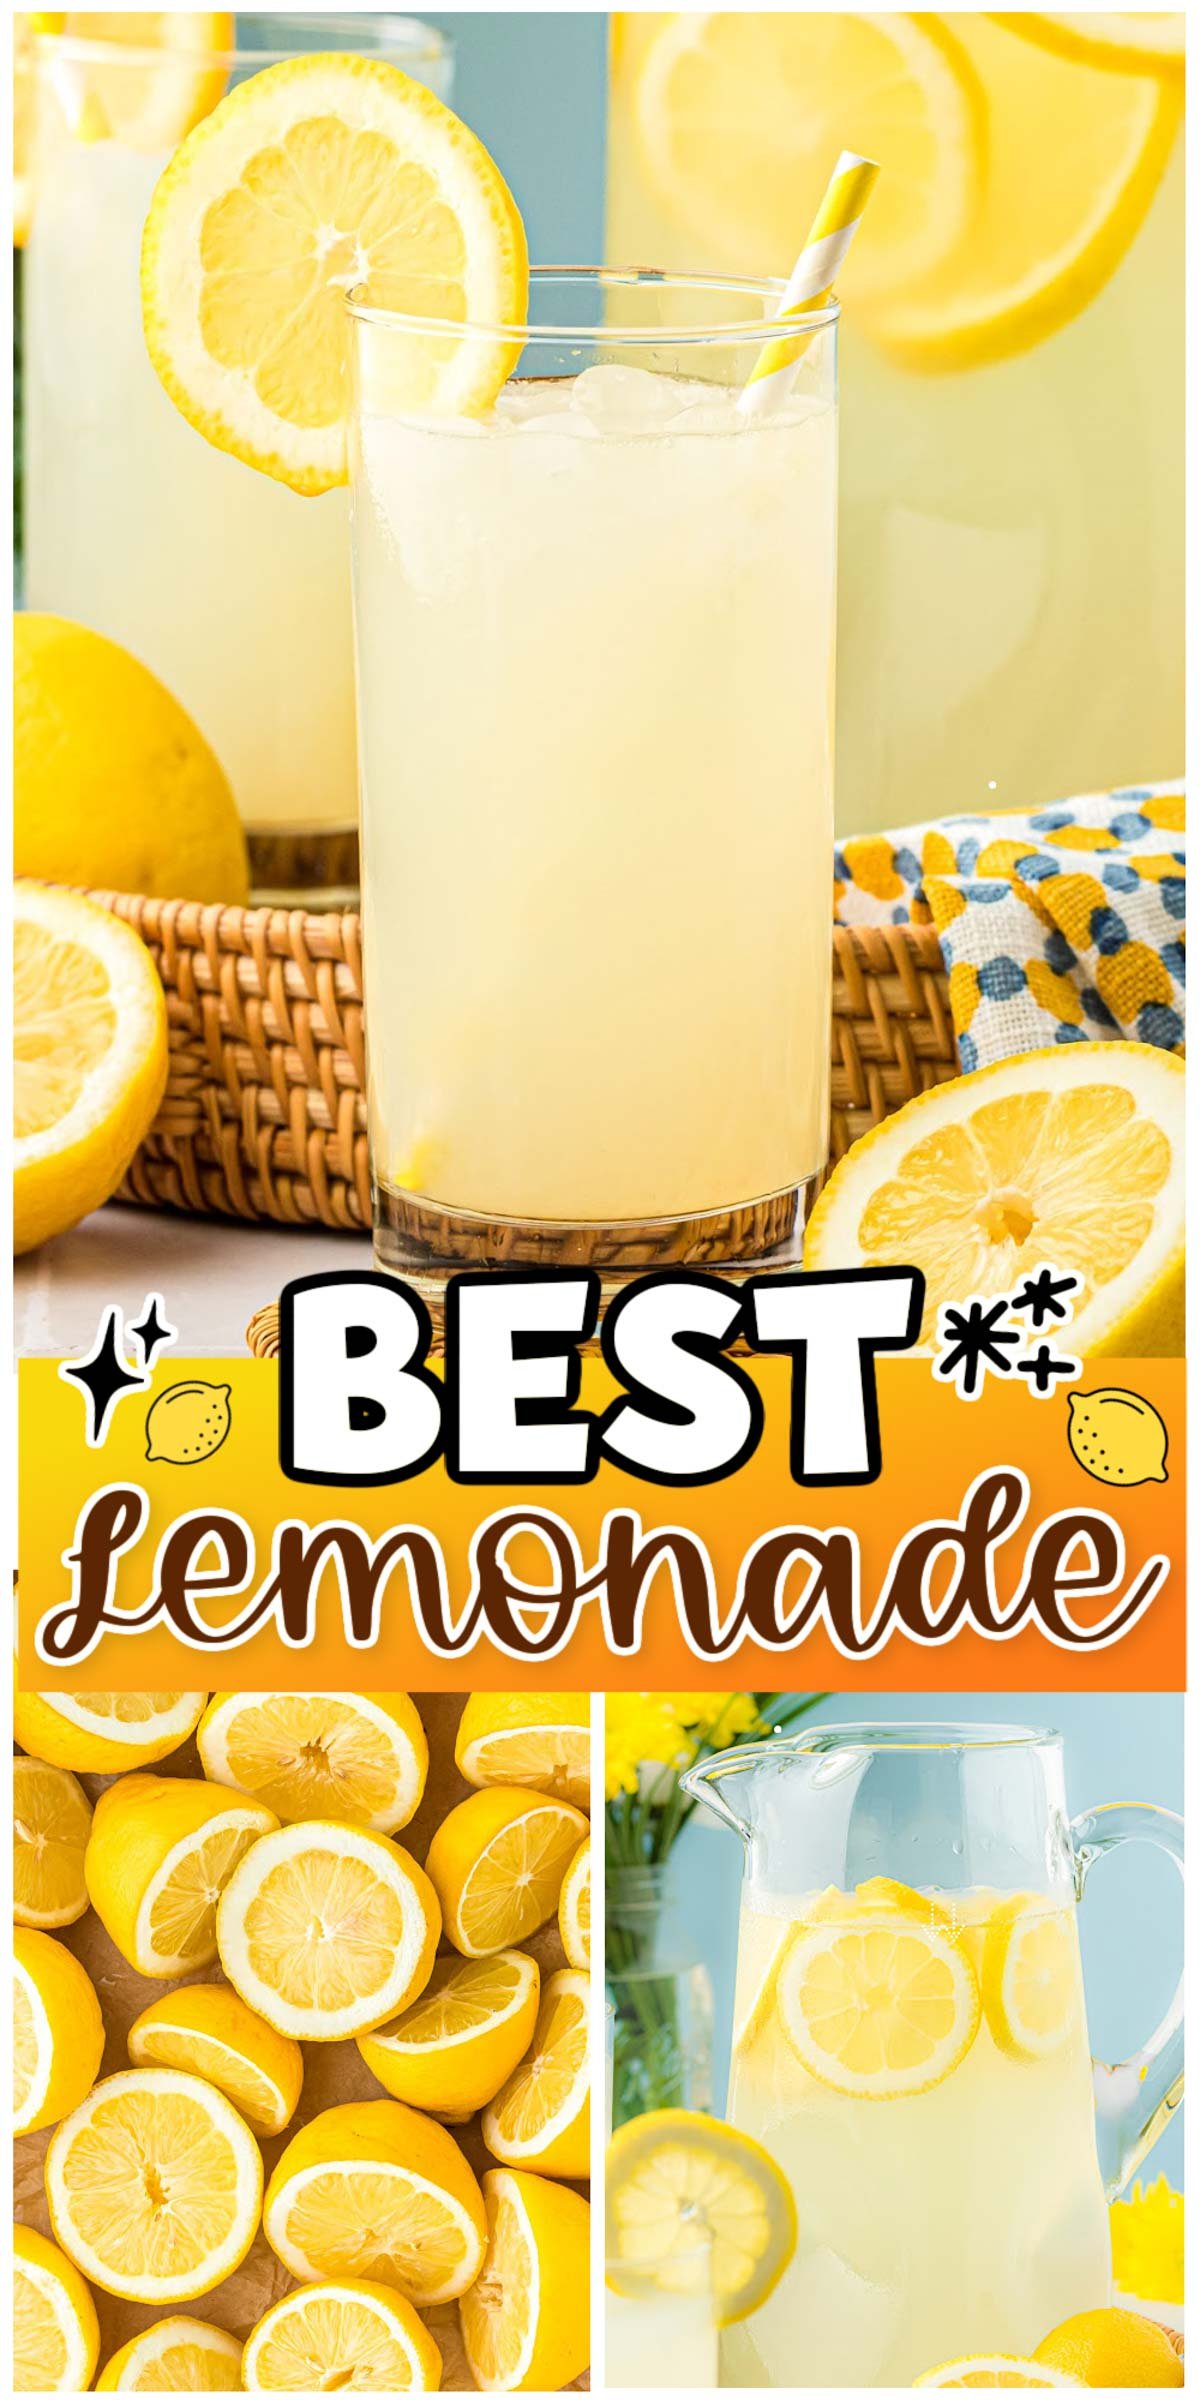 This Best Lemonade Recipe combines freshly squeezed roasted lemon juice with water and sugar to make an irresistible summertime drink! Plus, I've included my secret step for making the most incredible-tasting homemade lemonade! via @sugarandsoulco